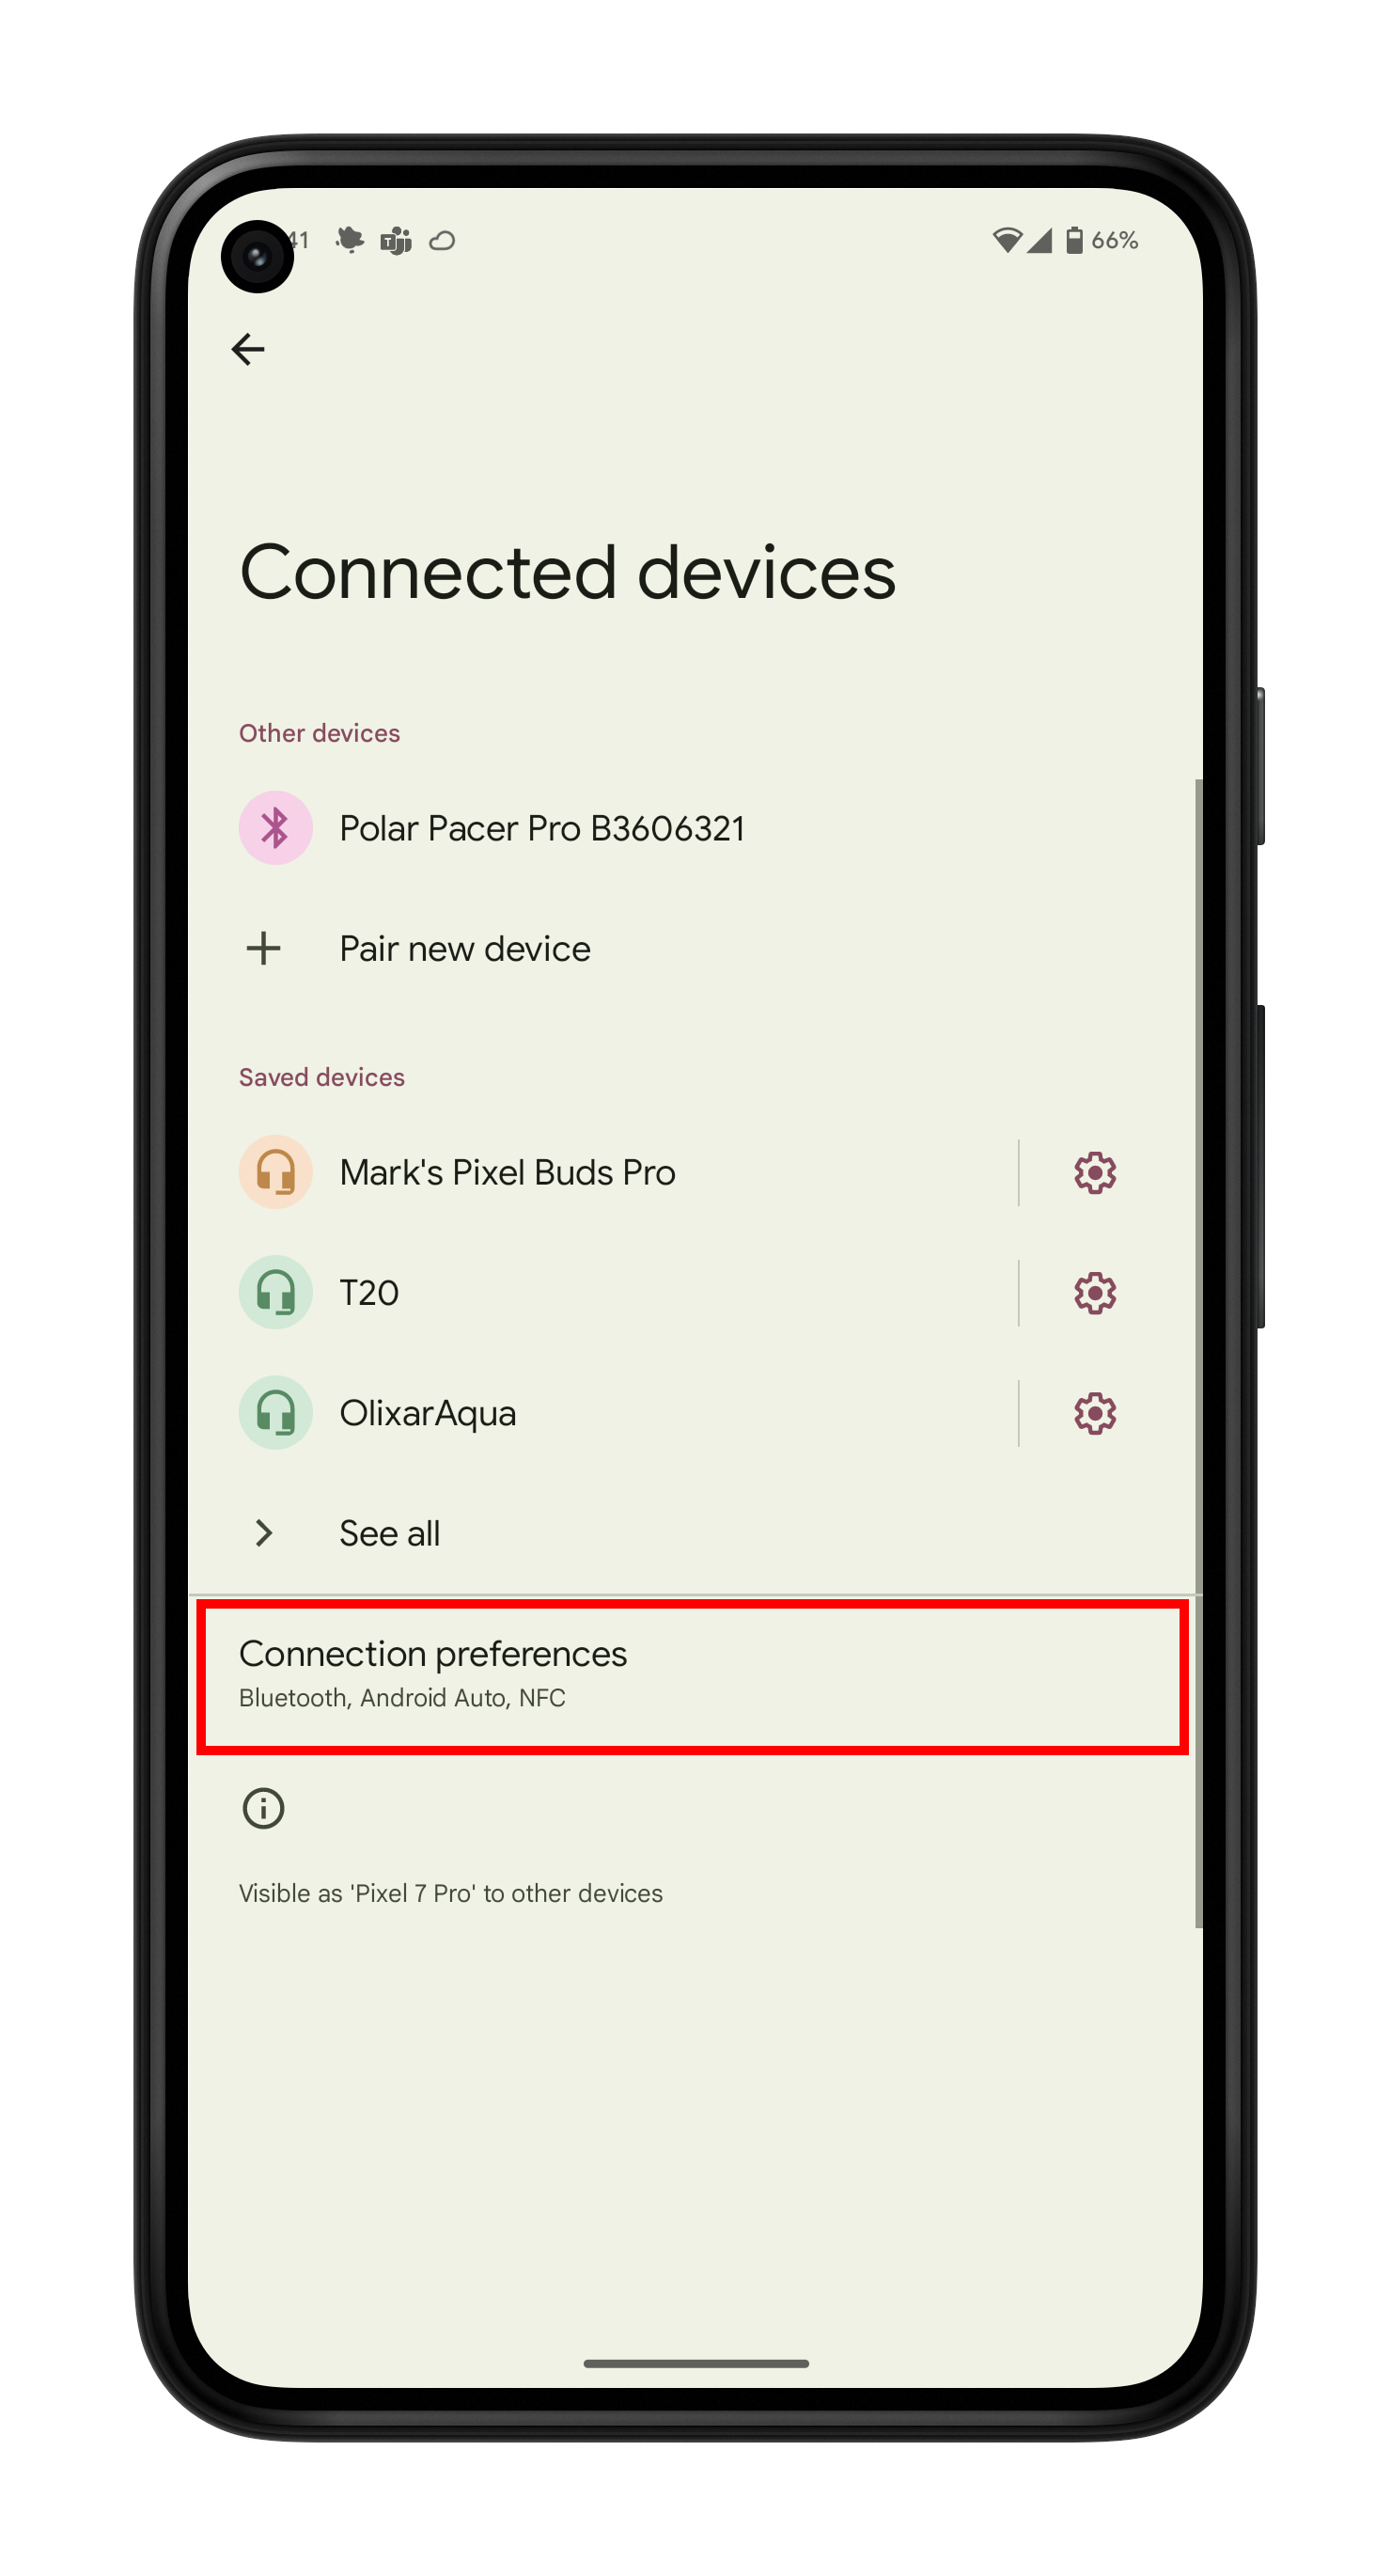 Mi Portable Printer Guide - Apps on Google Play